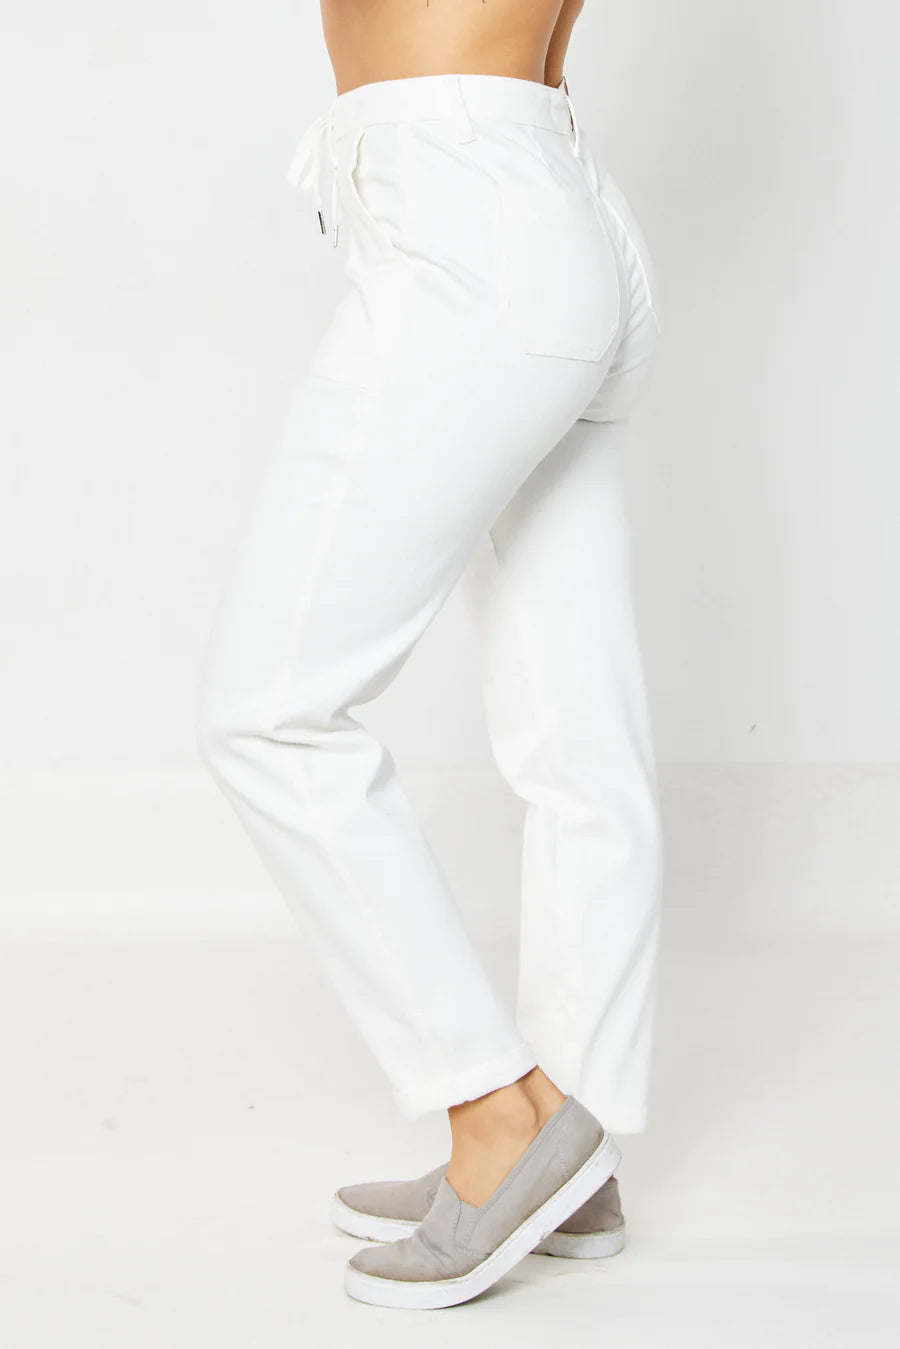 Judy Blue Joggers white